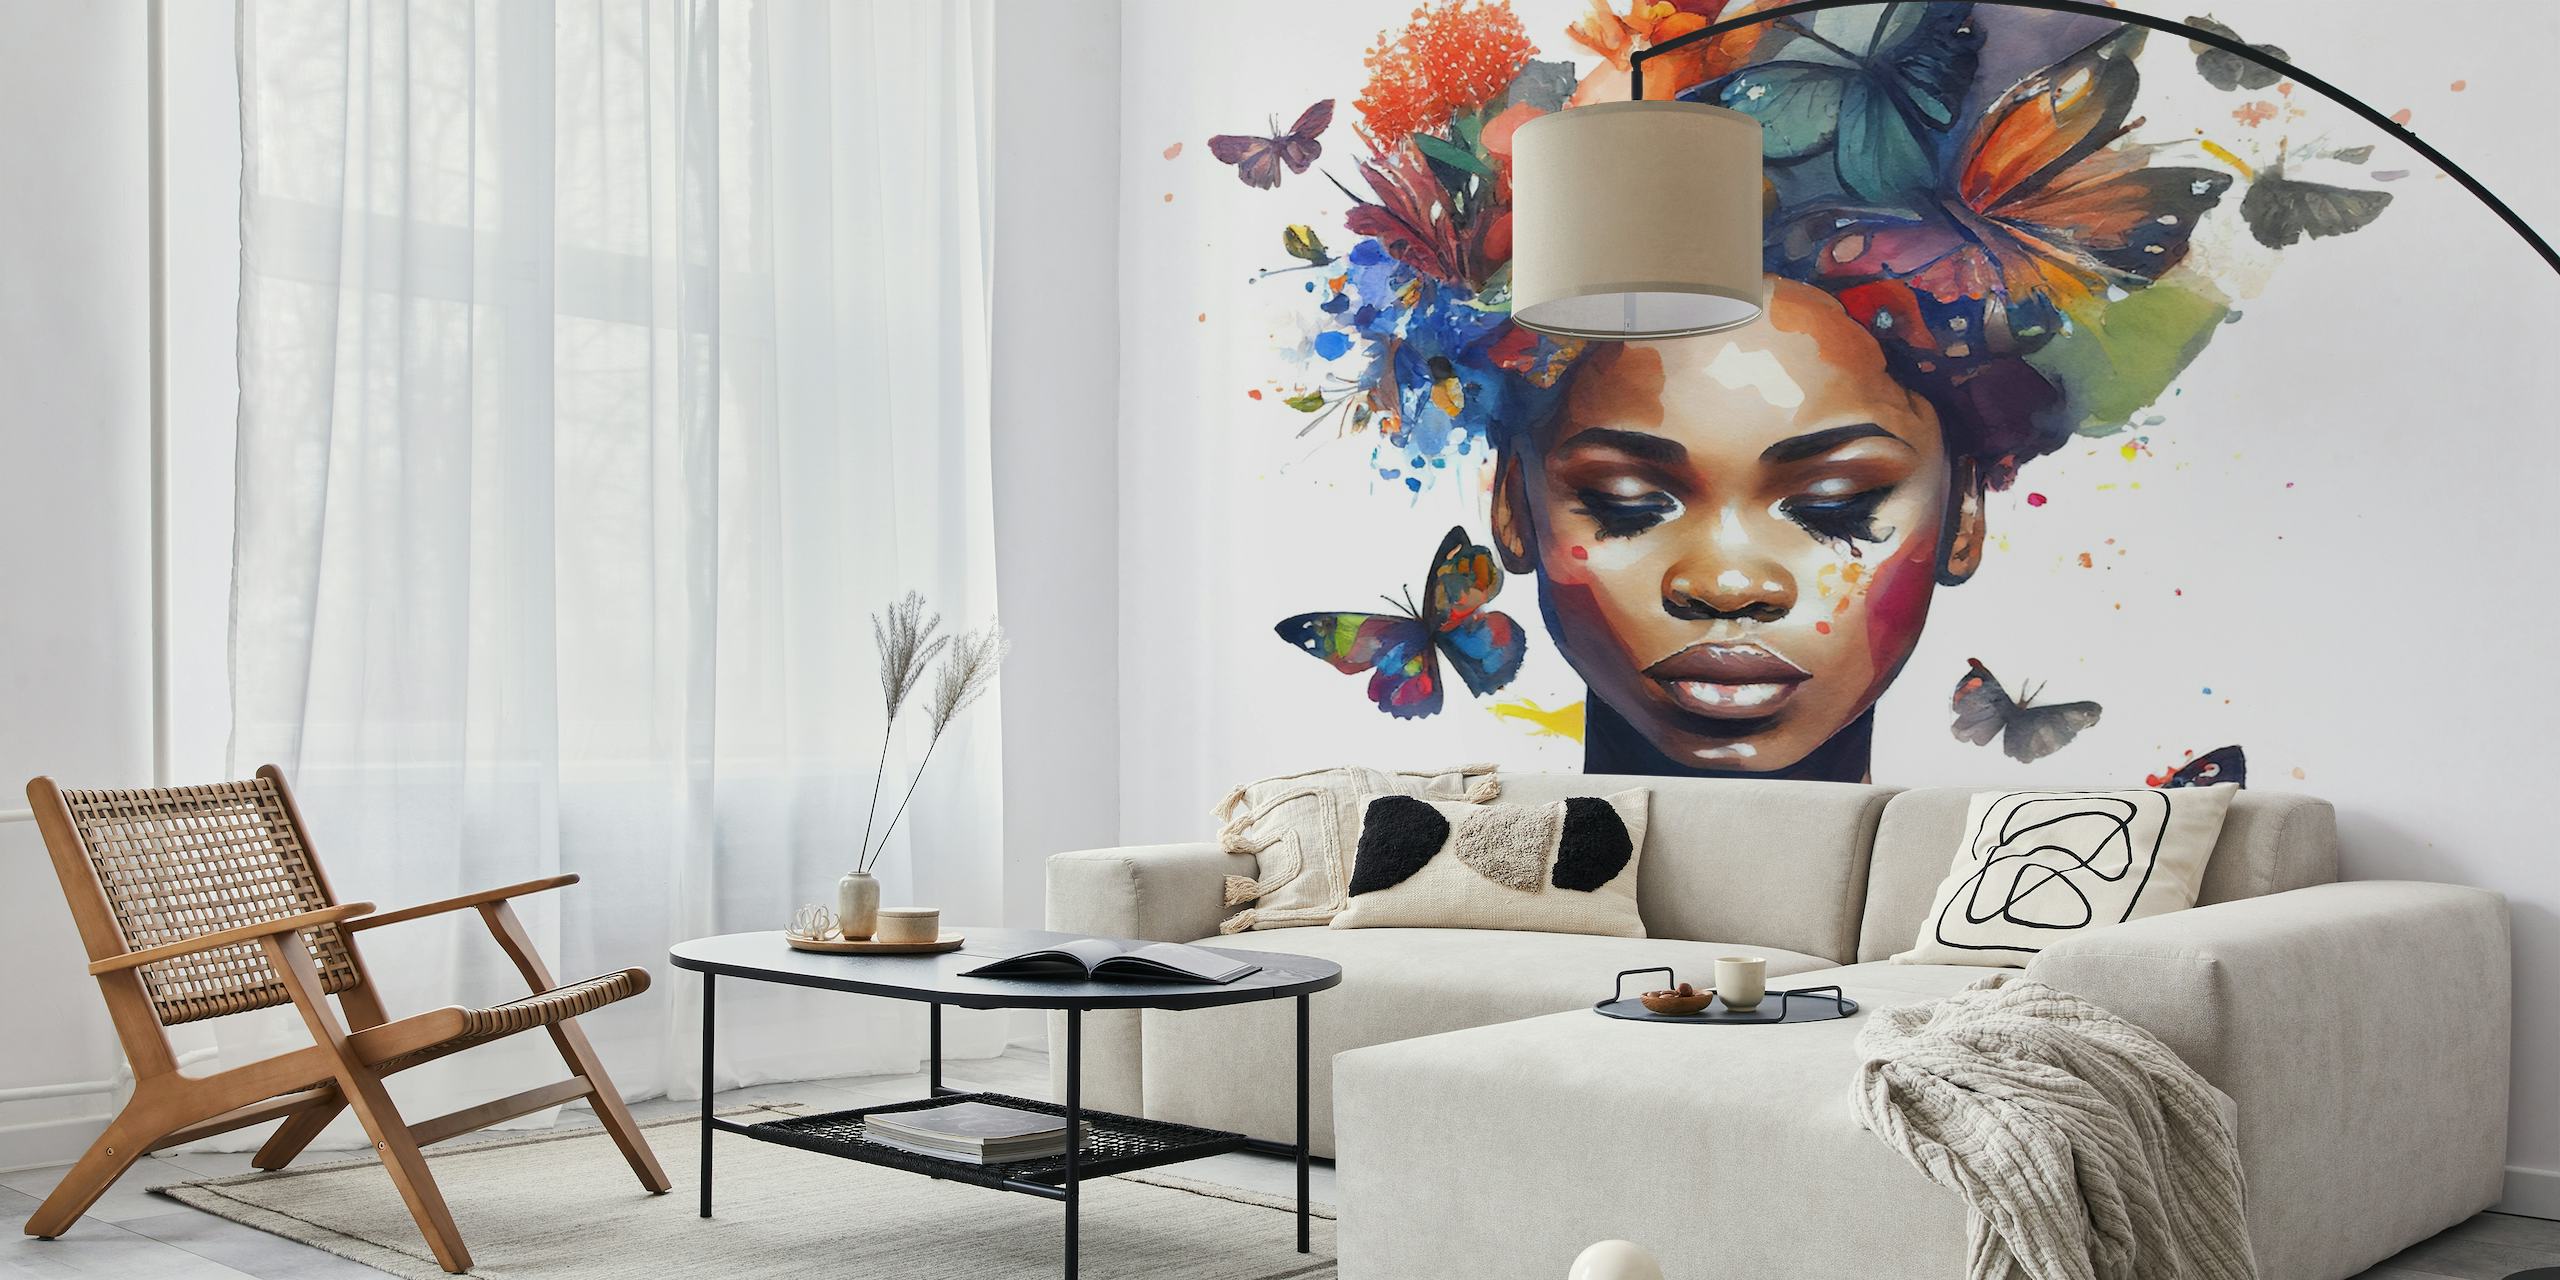 Artistic watercolor mural of an African woman with butterflies